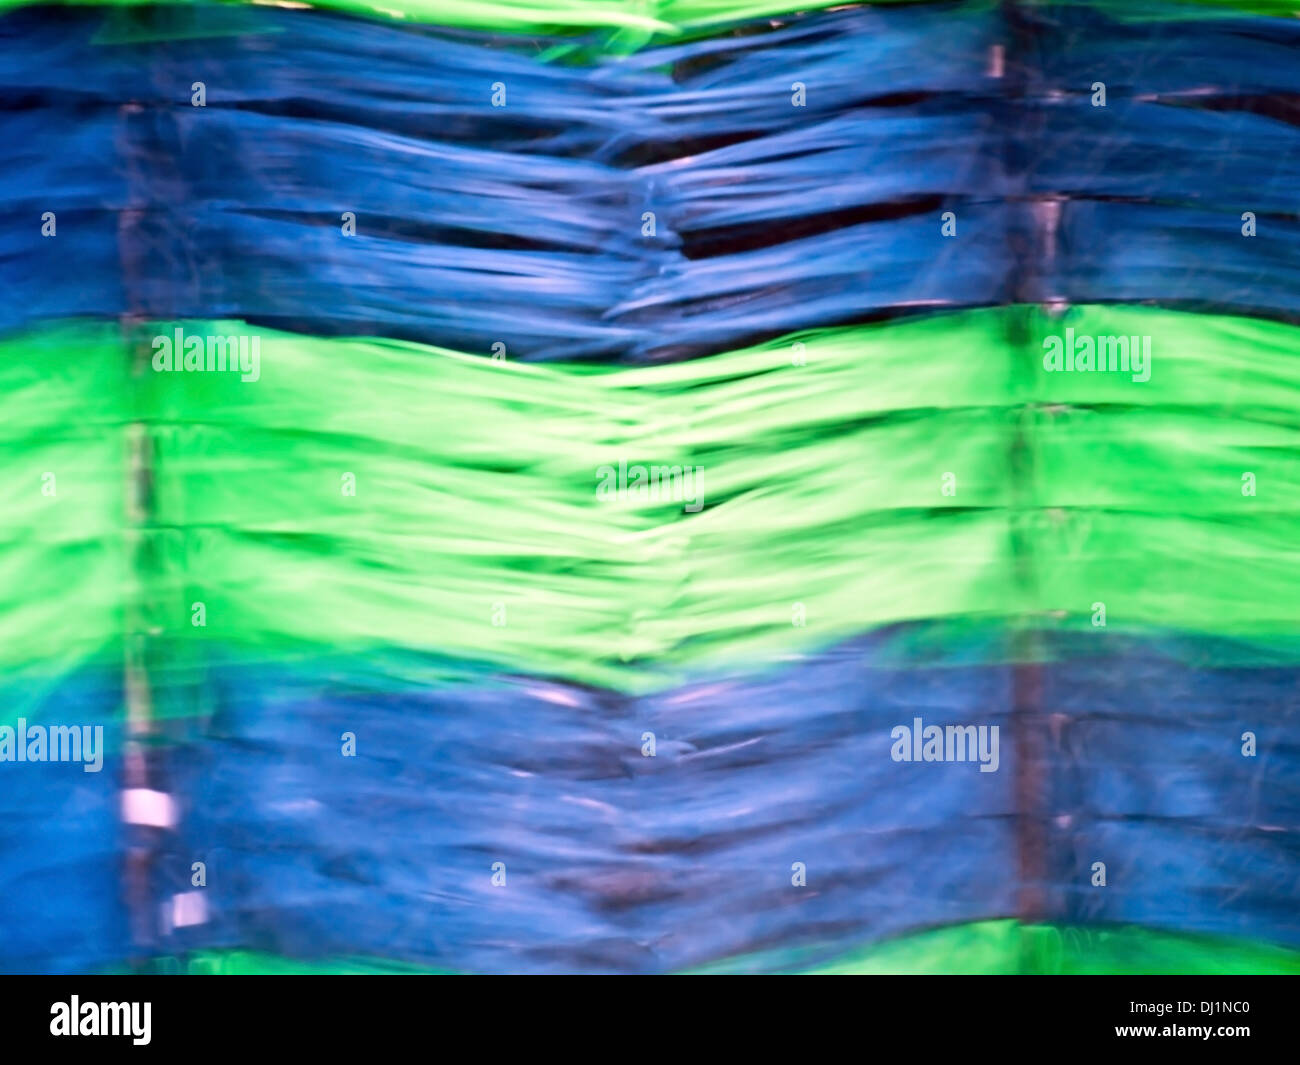 blue and green car wash brushes Stock Photo